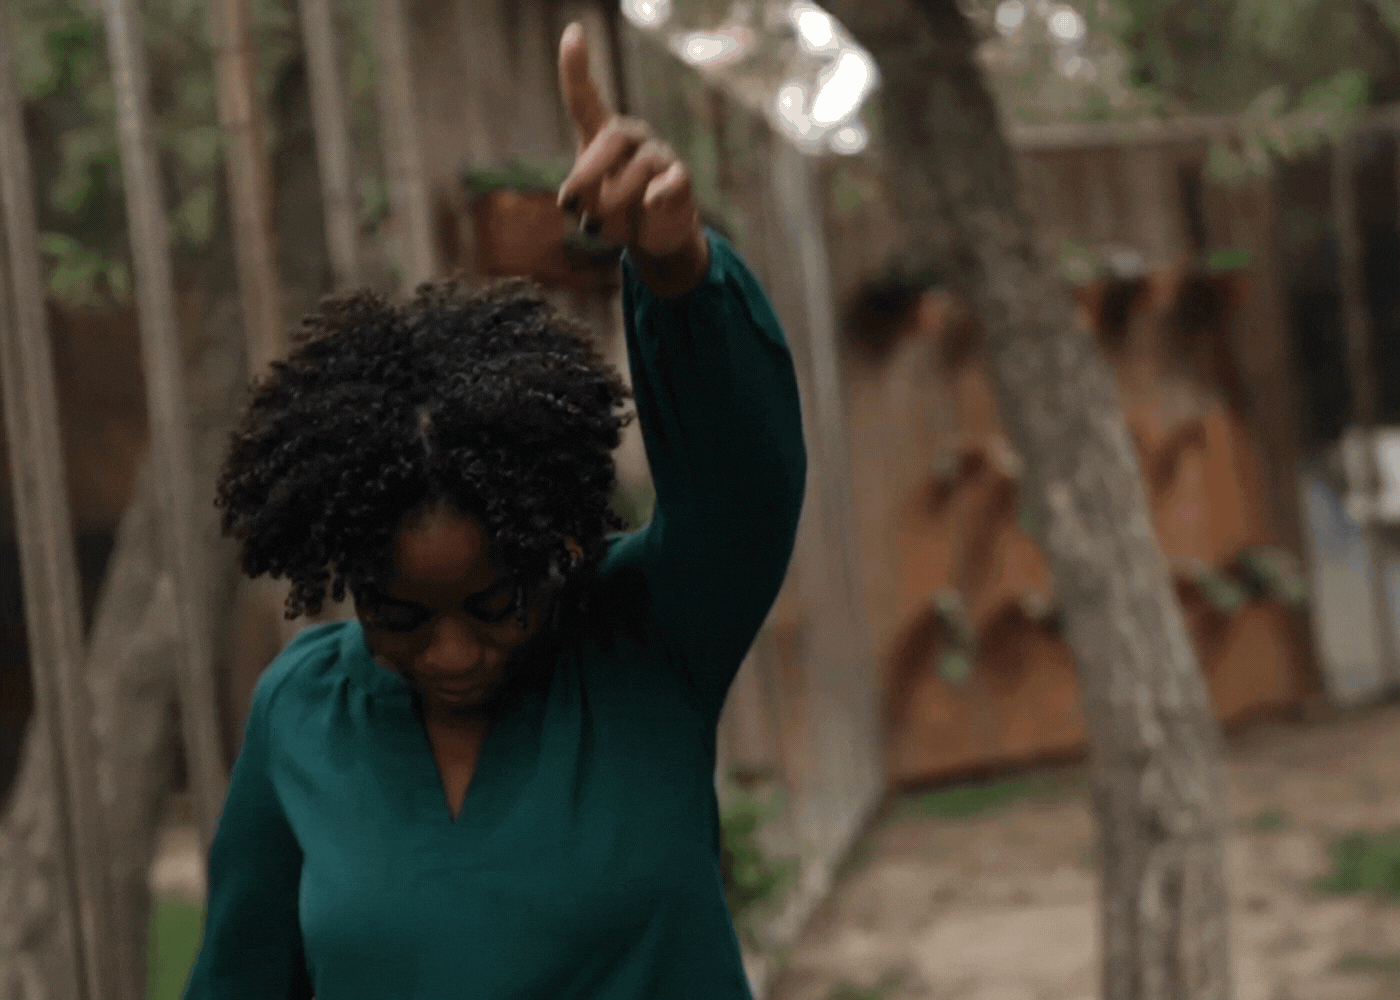 GIF of a woman dancing and laughing.